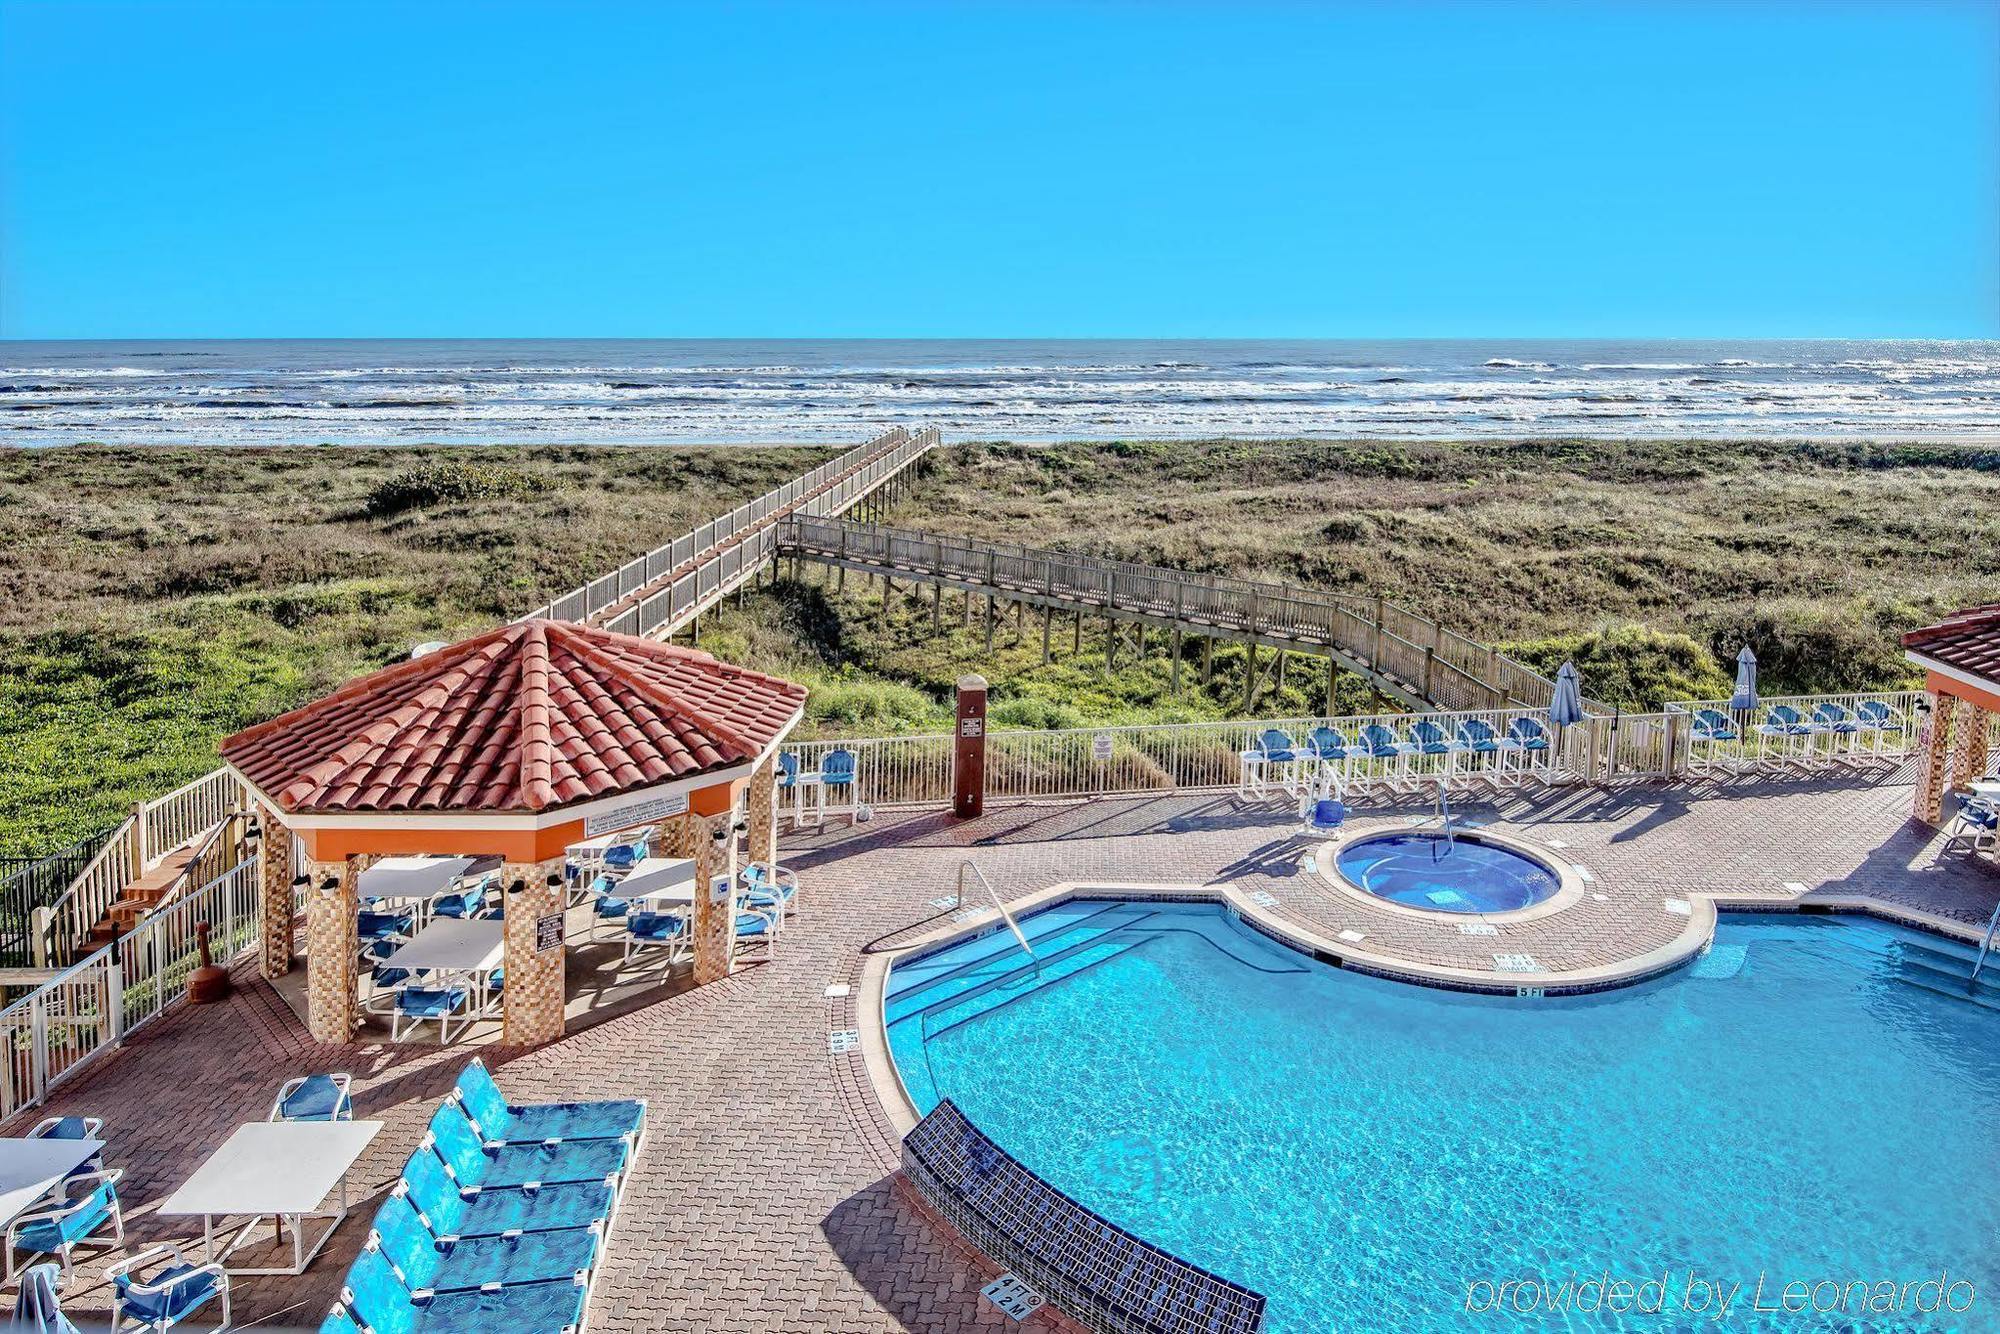 LA COPA INN BEACH HOTEL SOUTH PADRE ISLAND, TX 3* (United States) - from C$  153 | iBOOKED